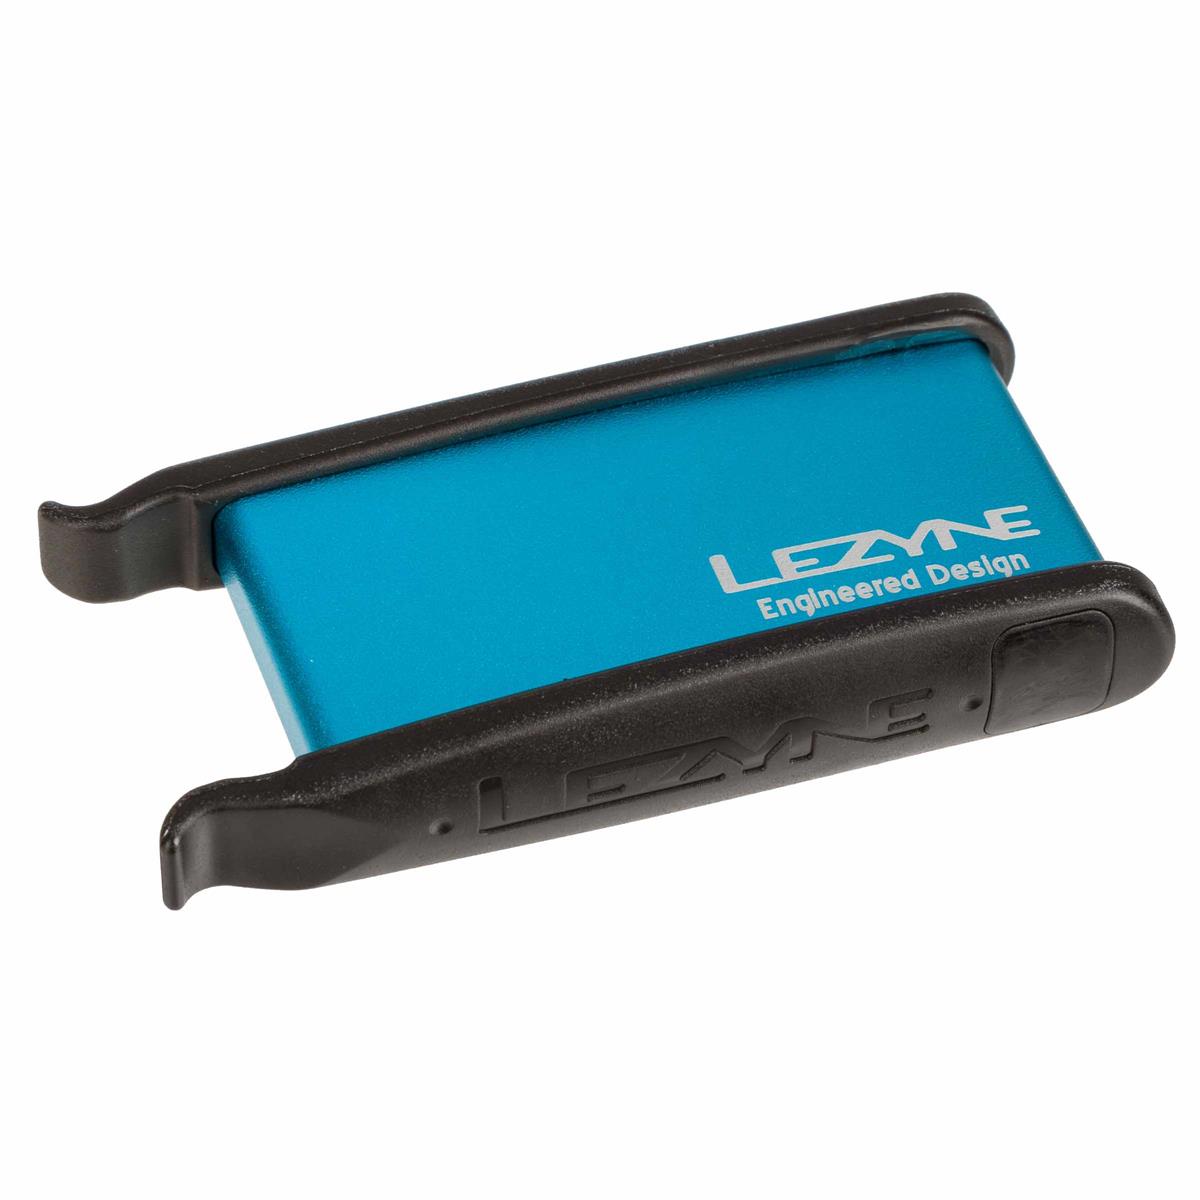 Lezyne Tire Lever Kit Lever Kit with Repairkit, Blue